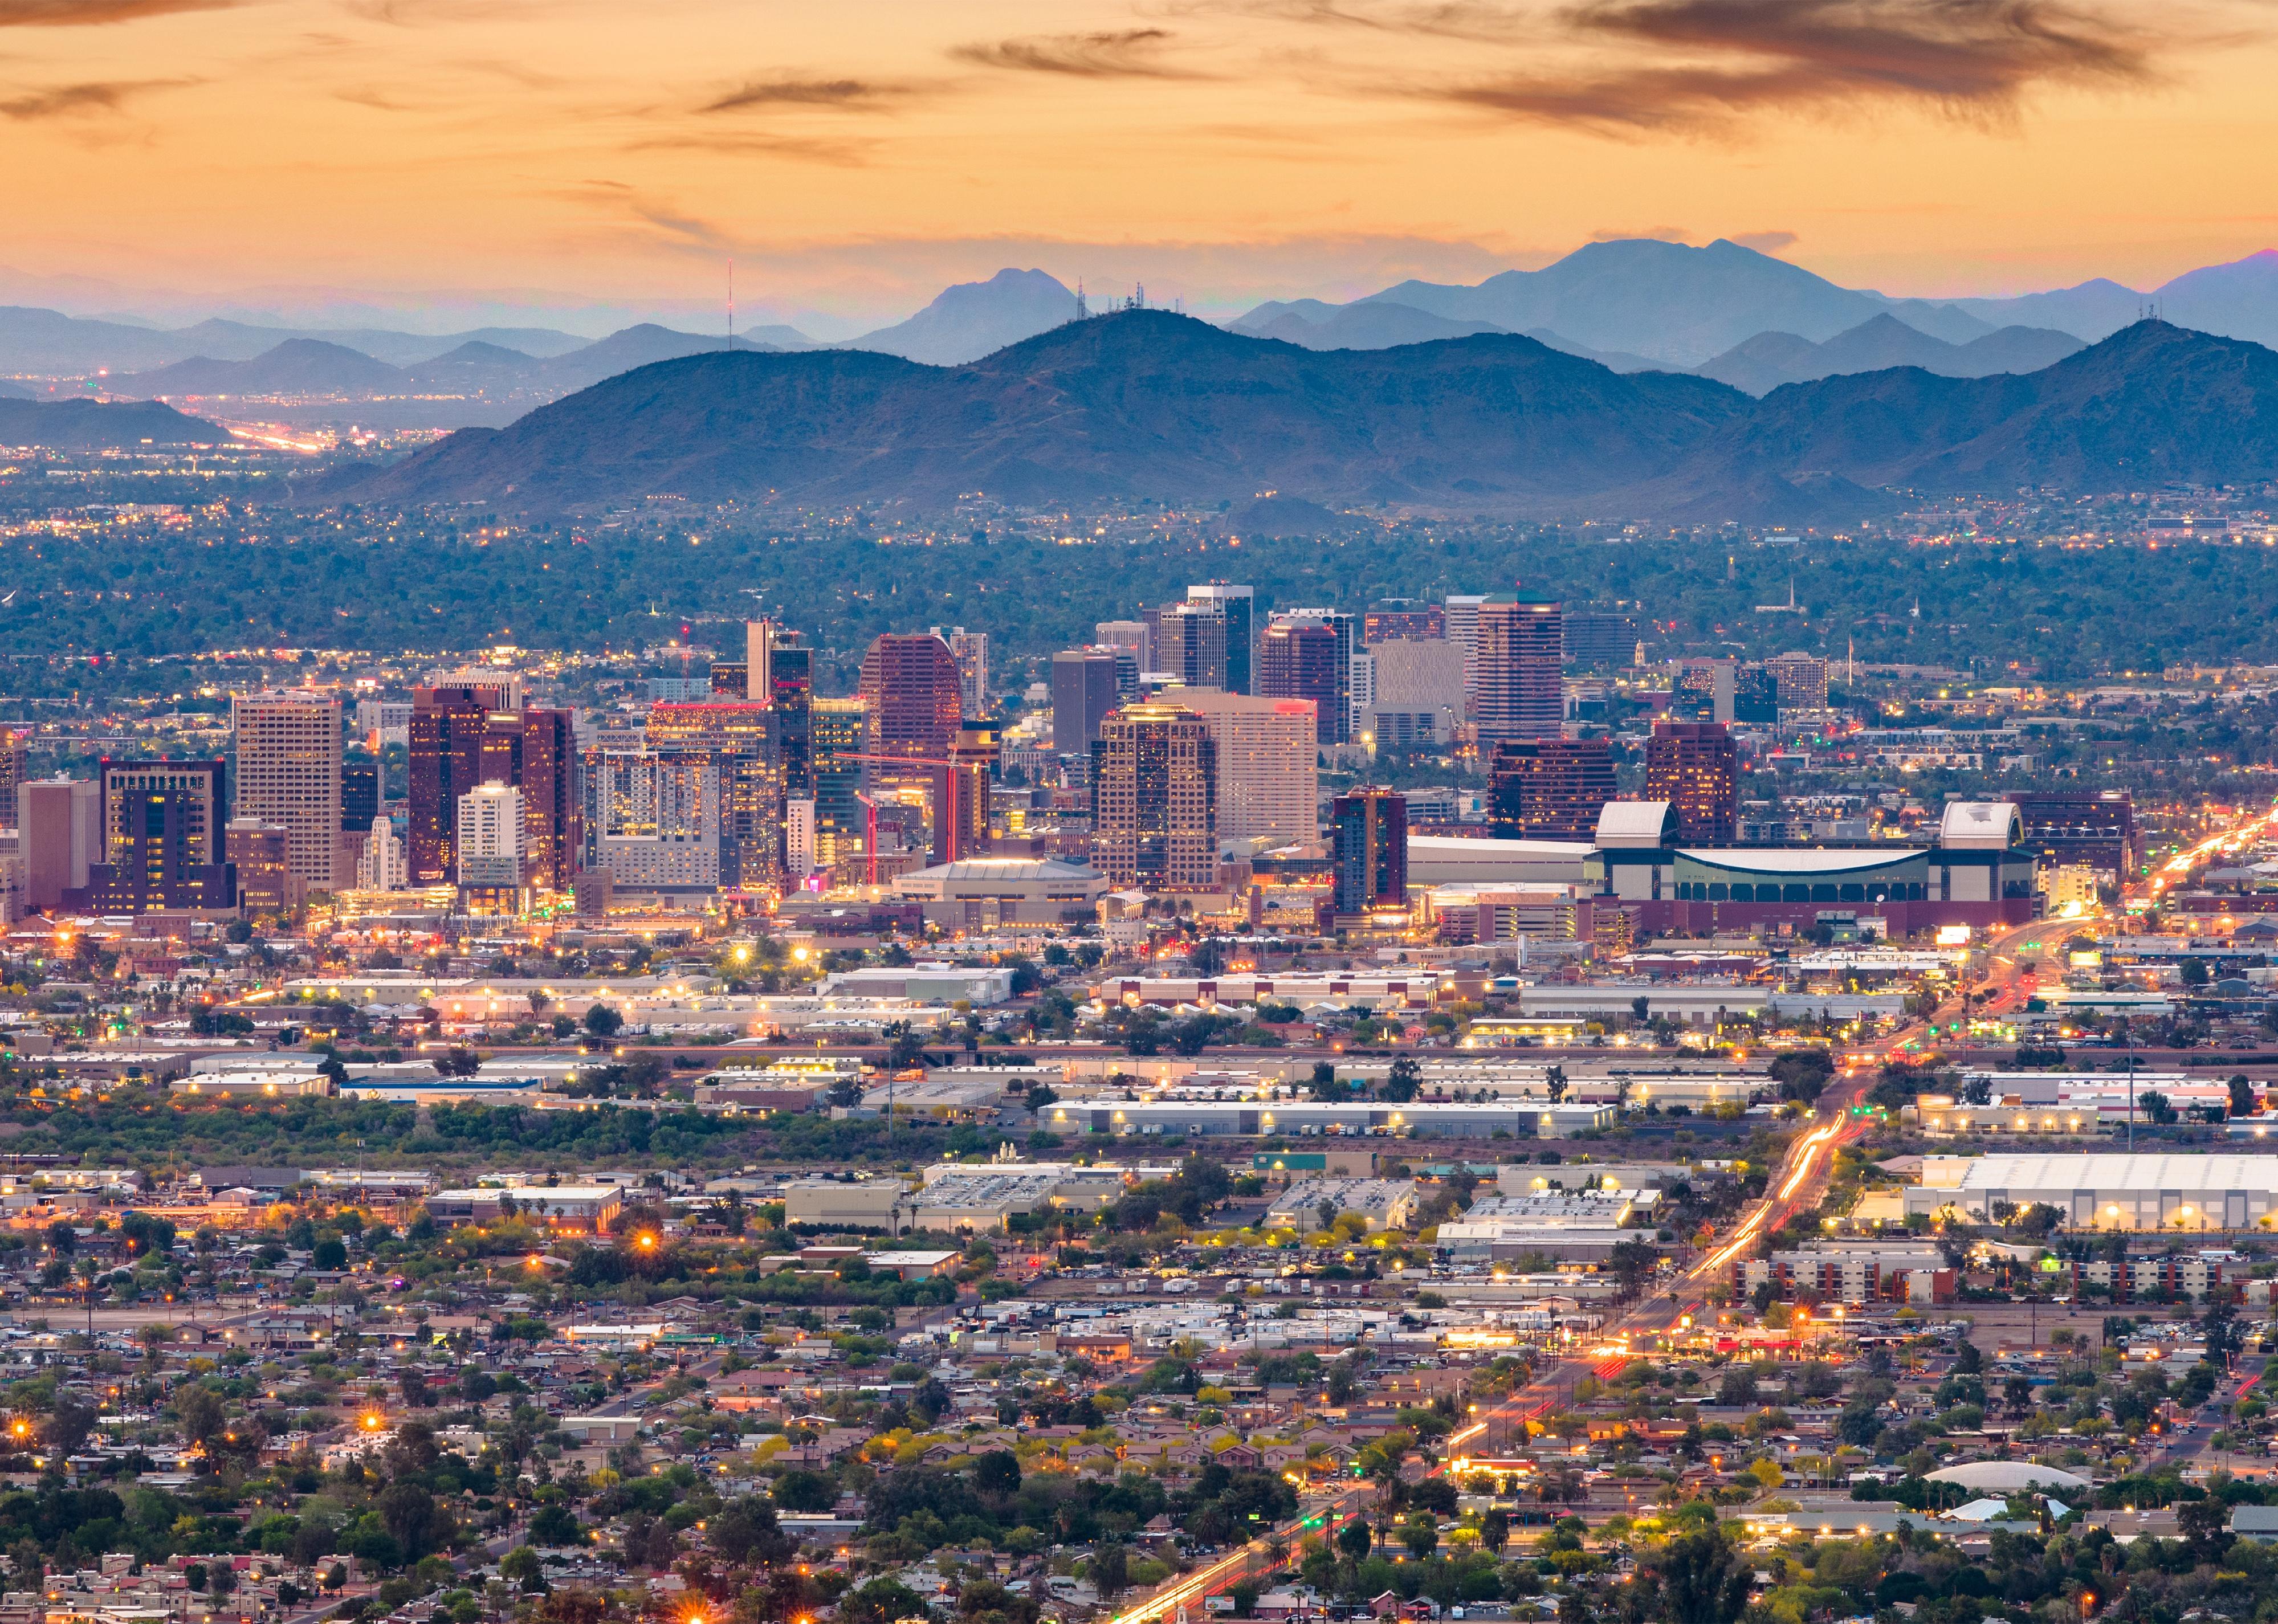 View of downtown Phoenix at dusk.